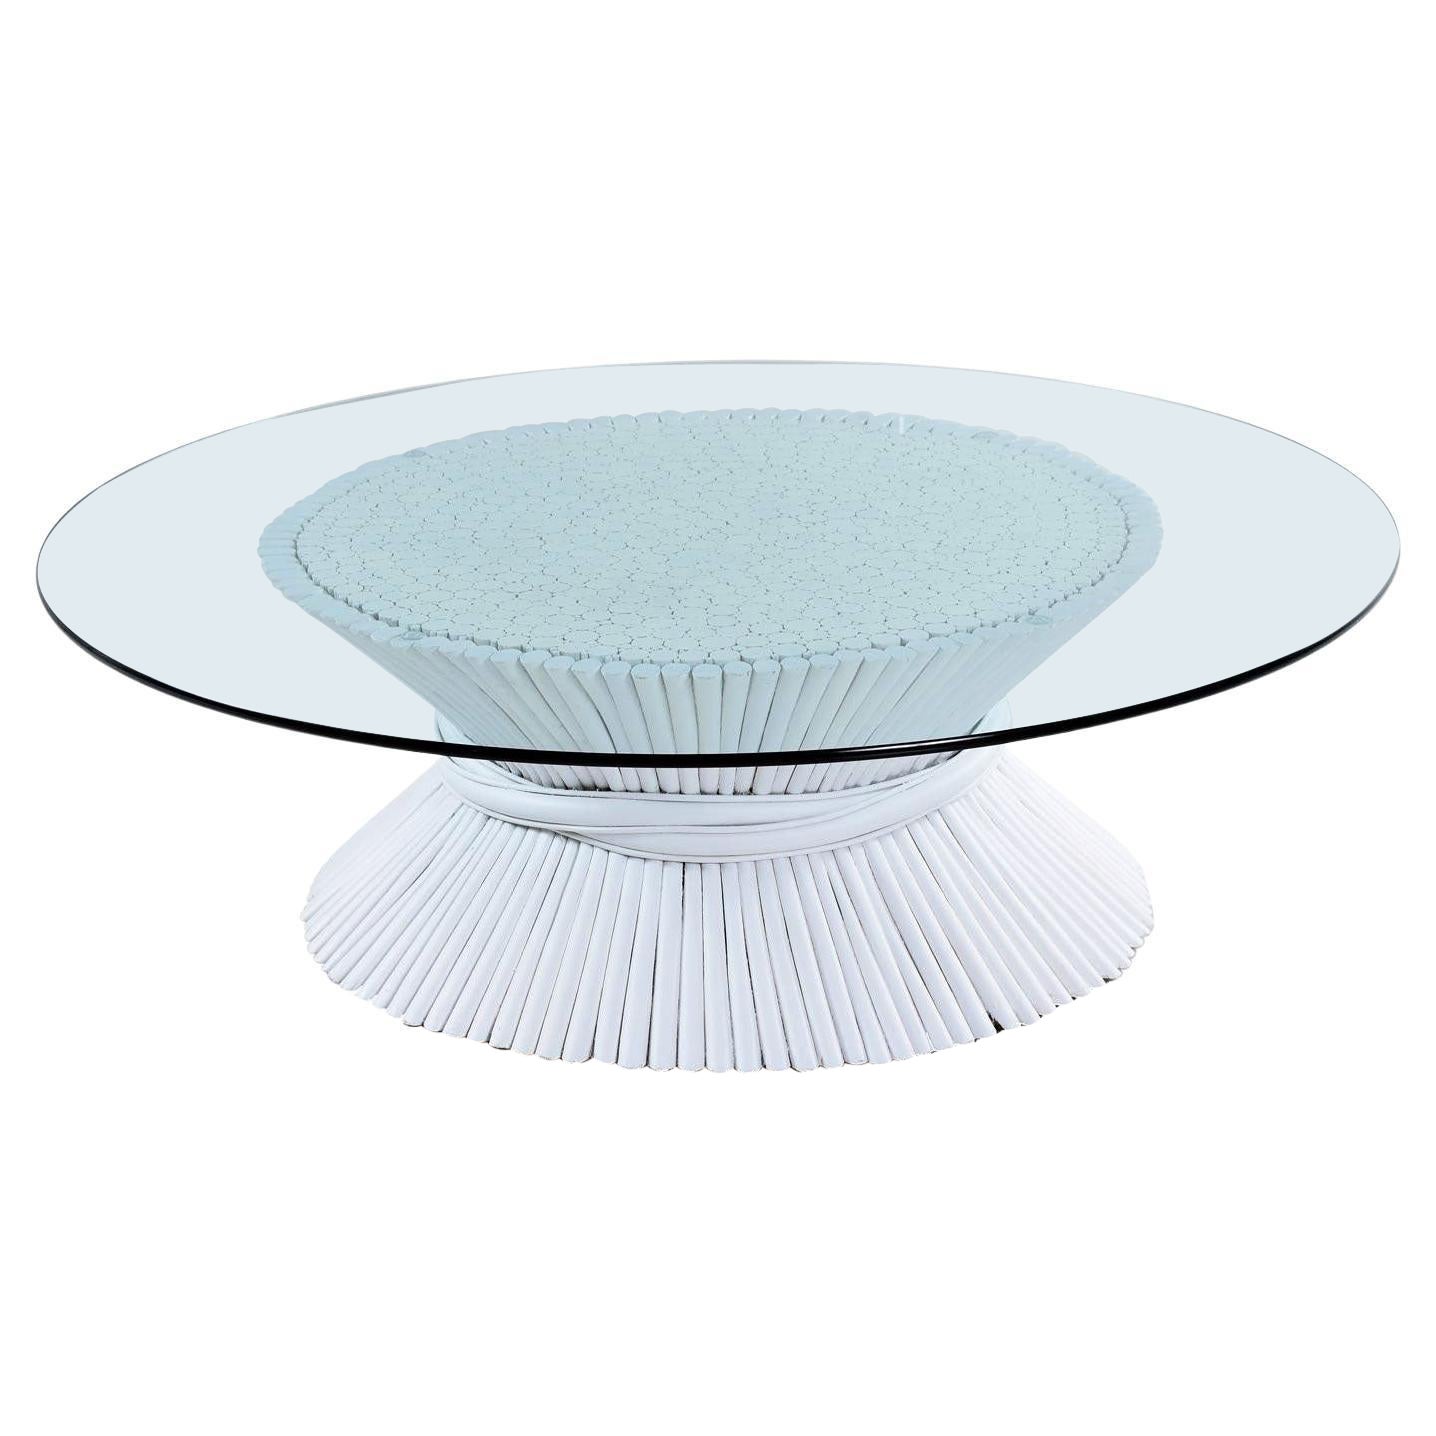 McGuire Coastal White Rattan Wheat Sheaf Coffee Table with Round Glass For Sale